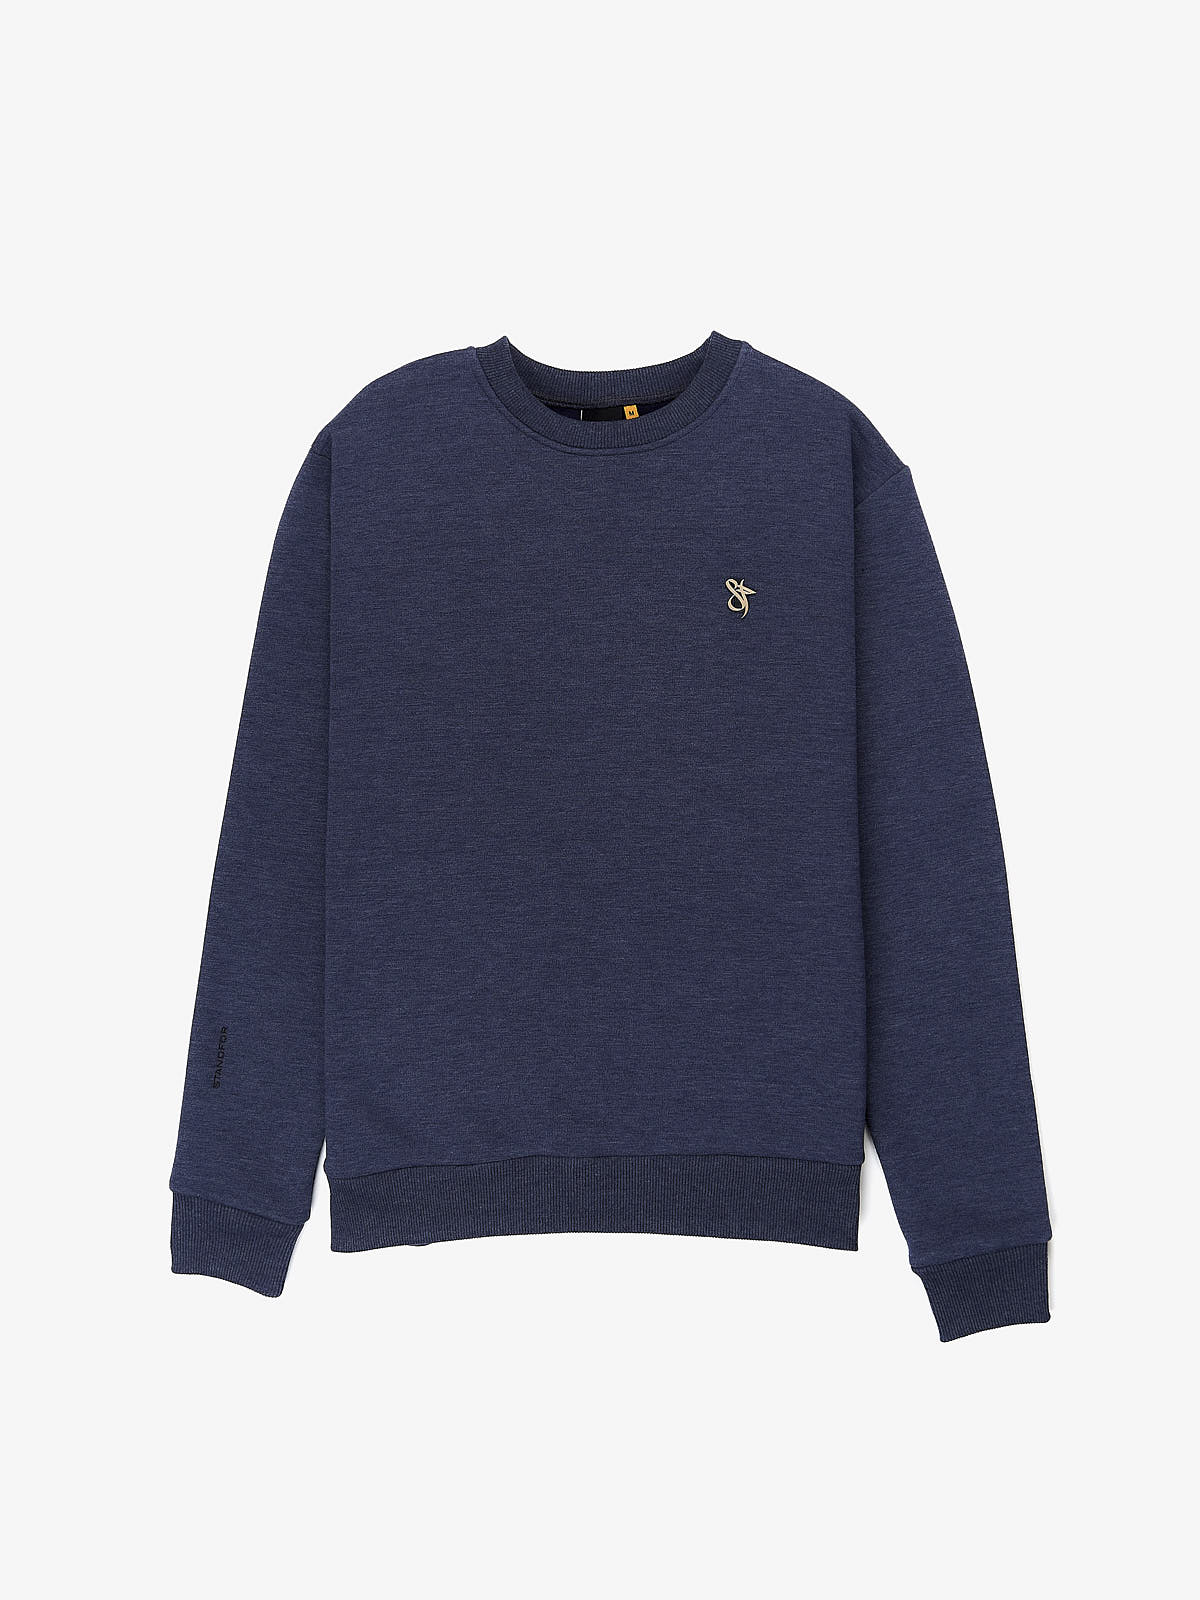 SF Classics Lux Pin Sweatshirt Jeans | Standfor®